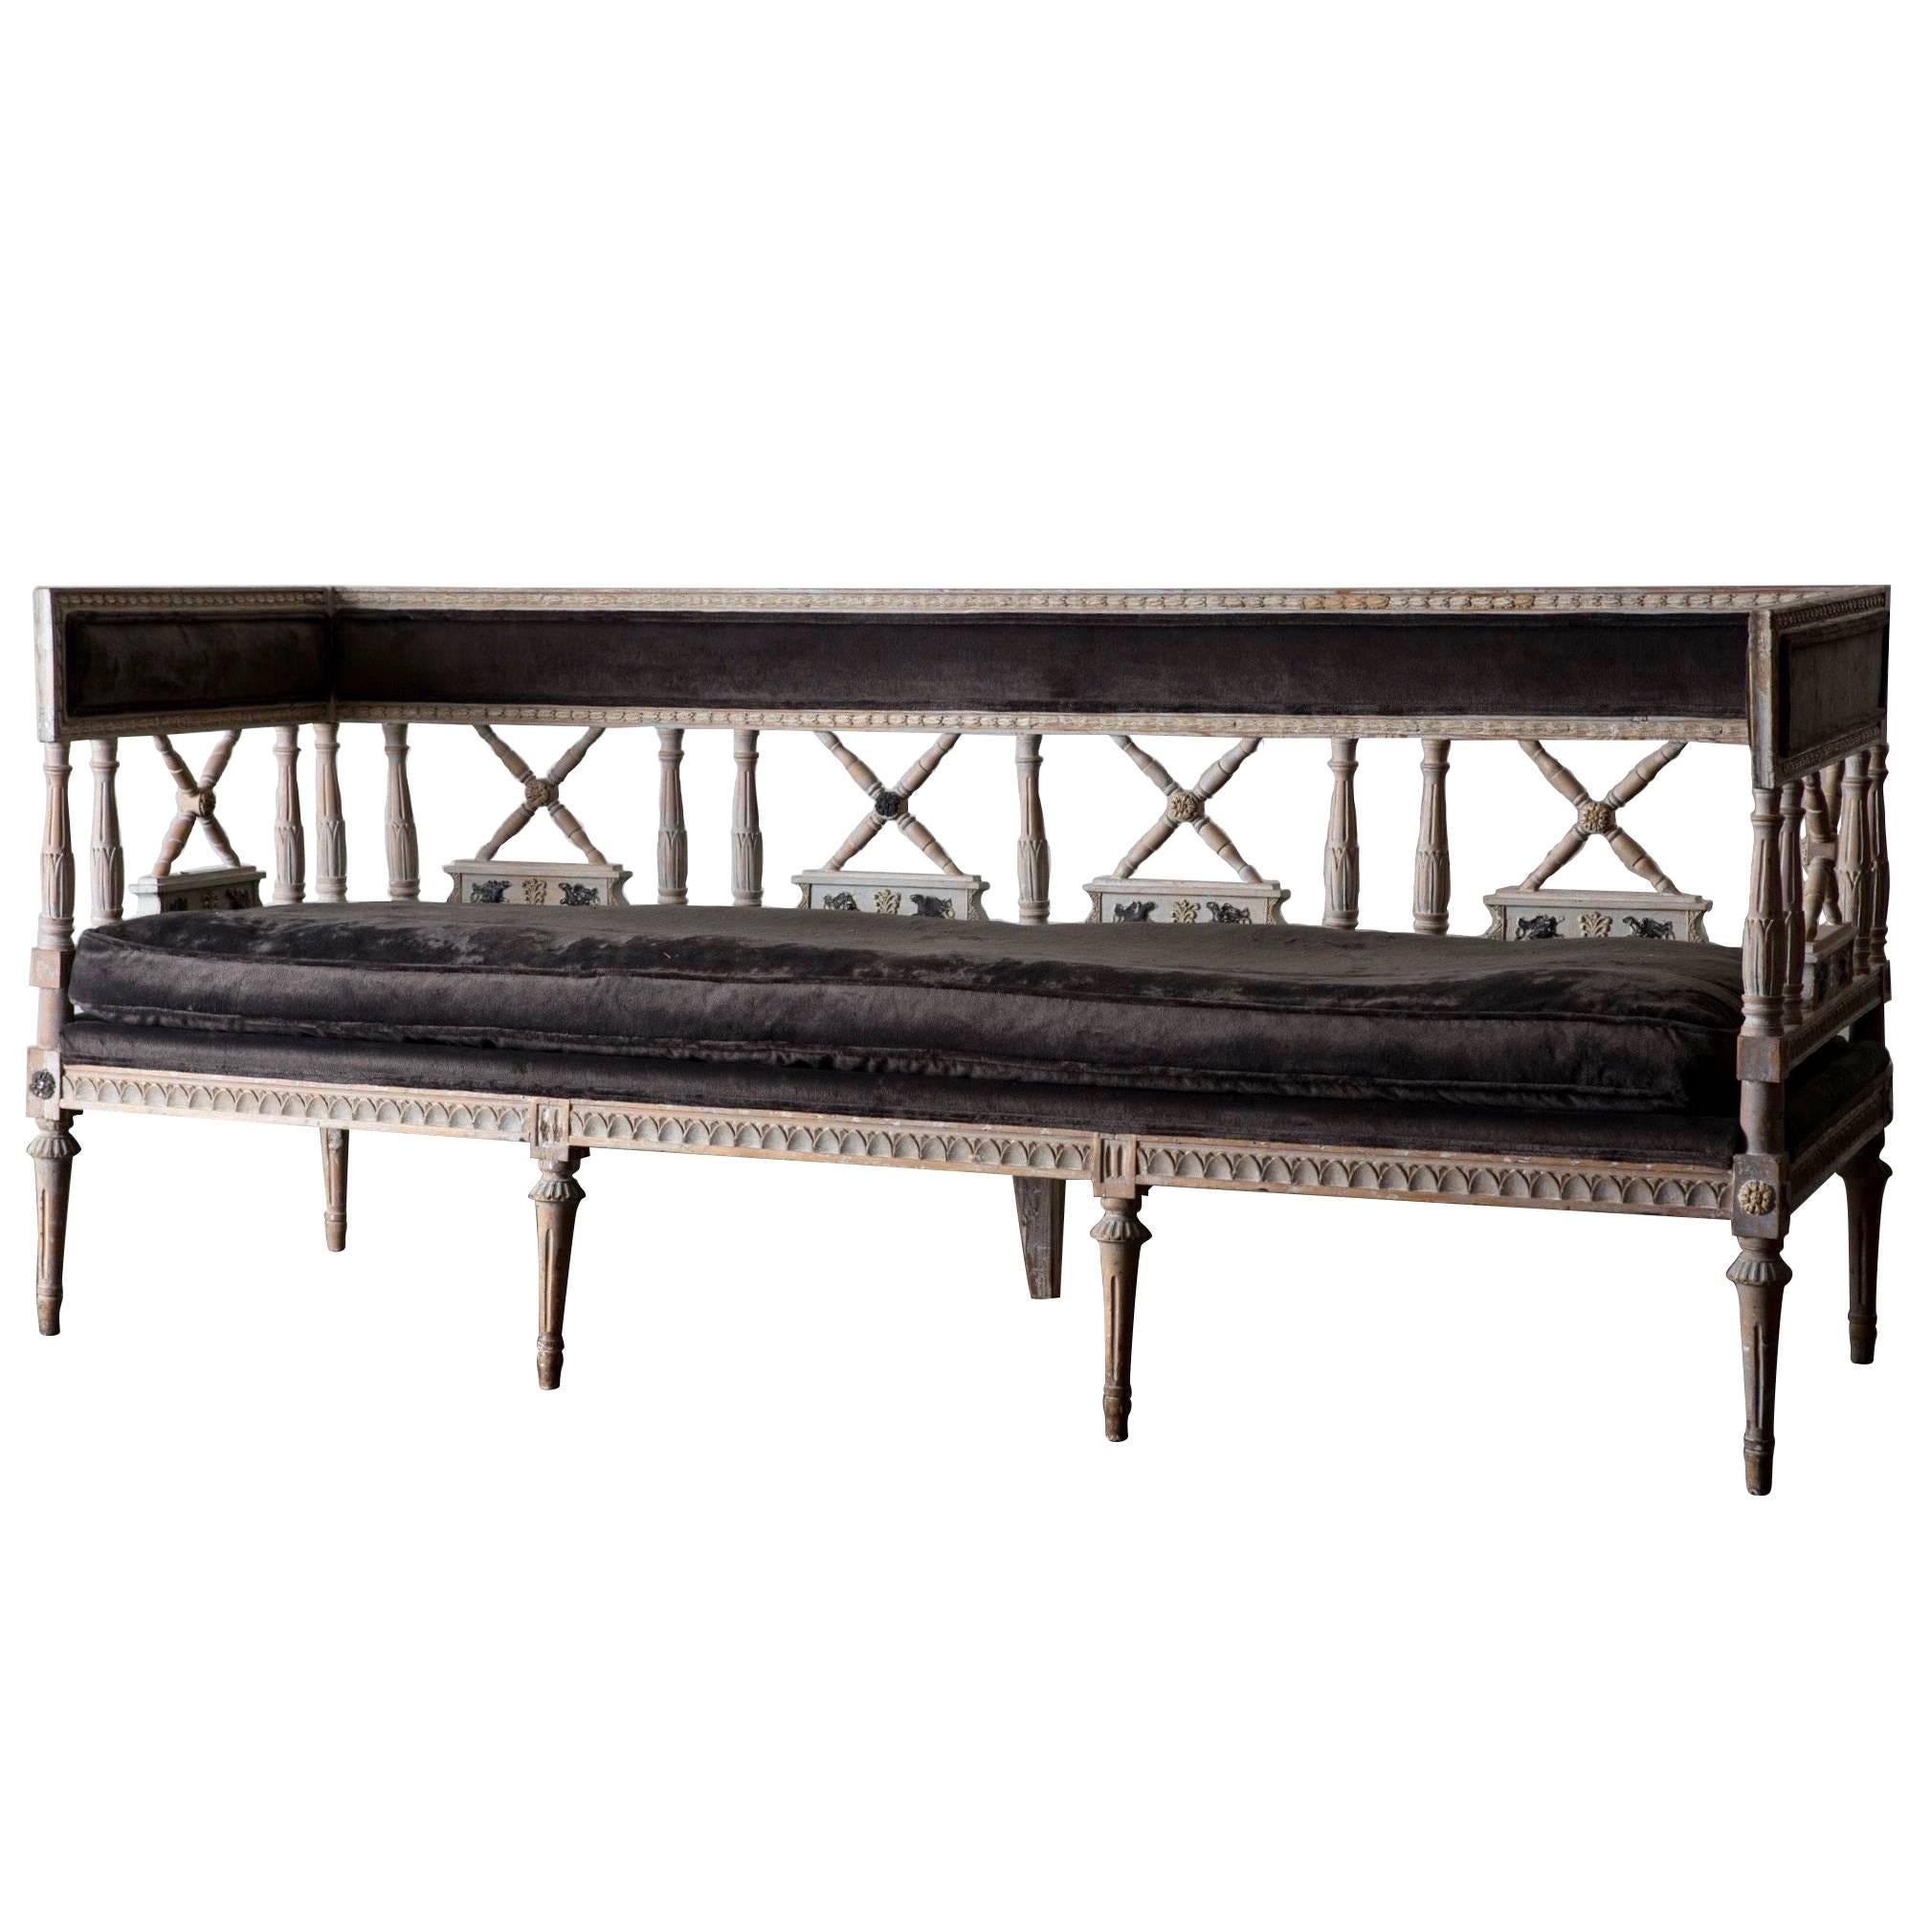 Sofa Bench Long Swedish Neoclassical Original Paint, Early 19th Century, Sweden